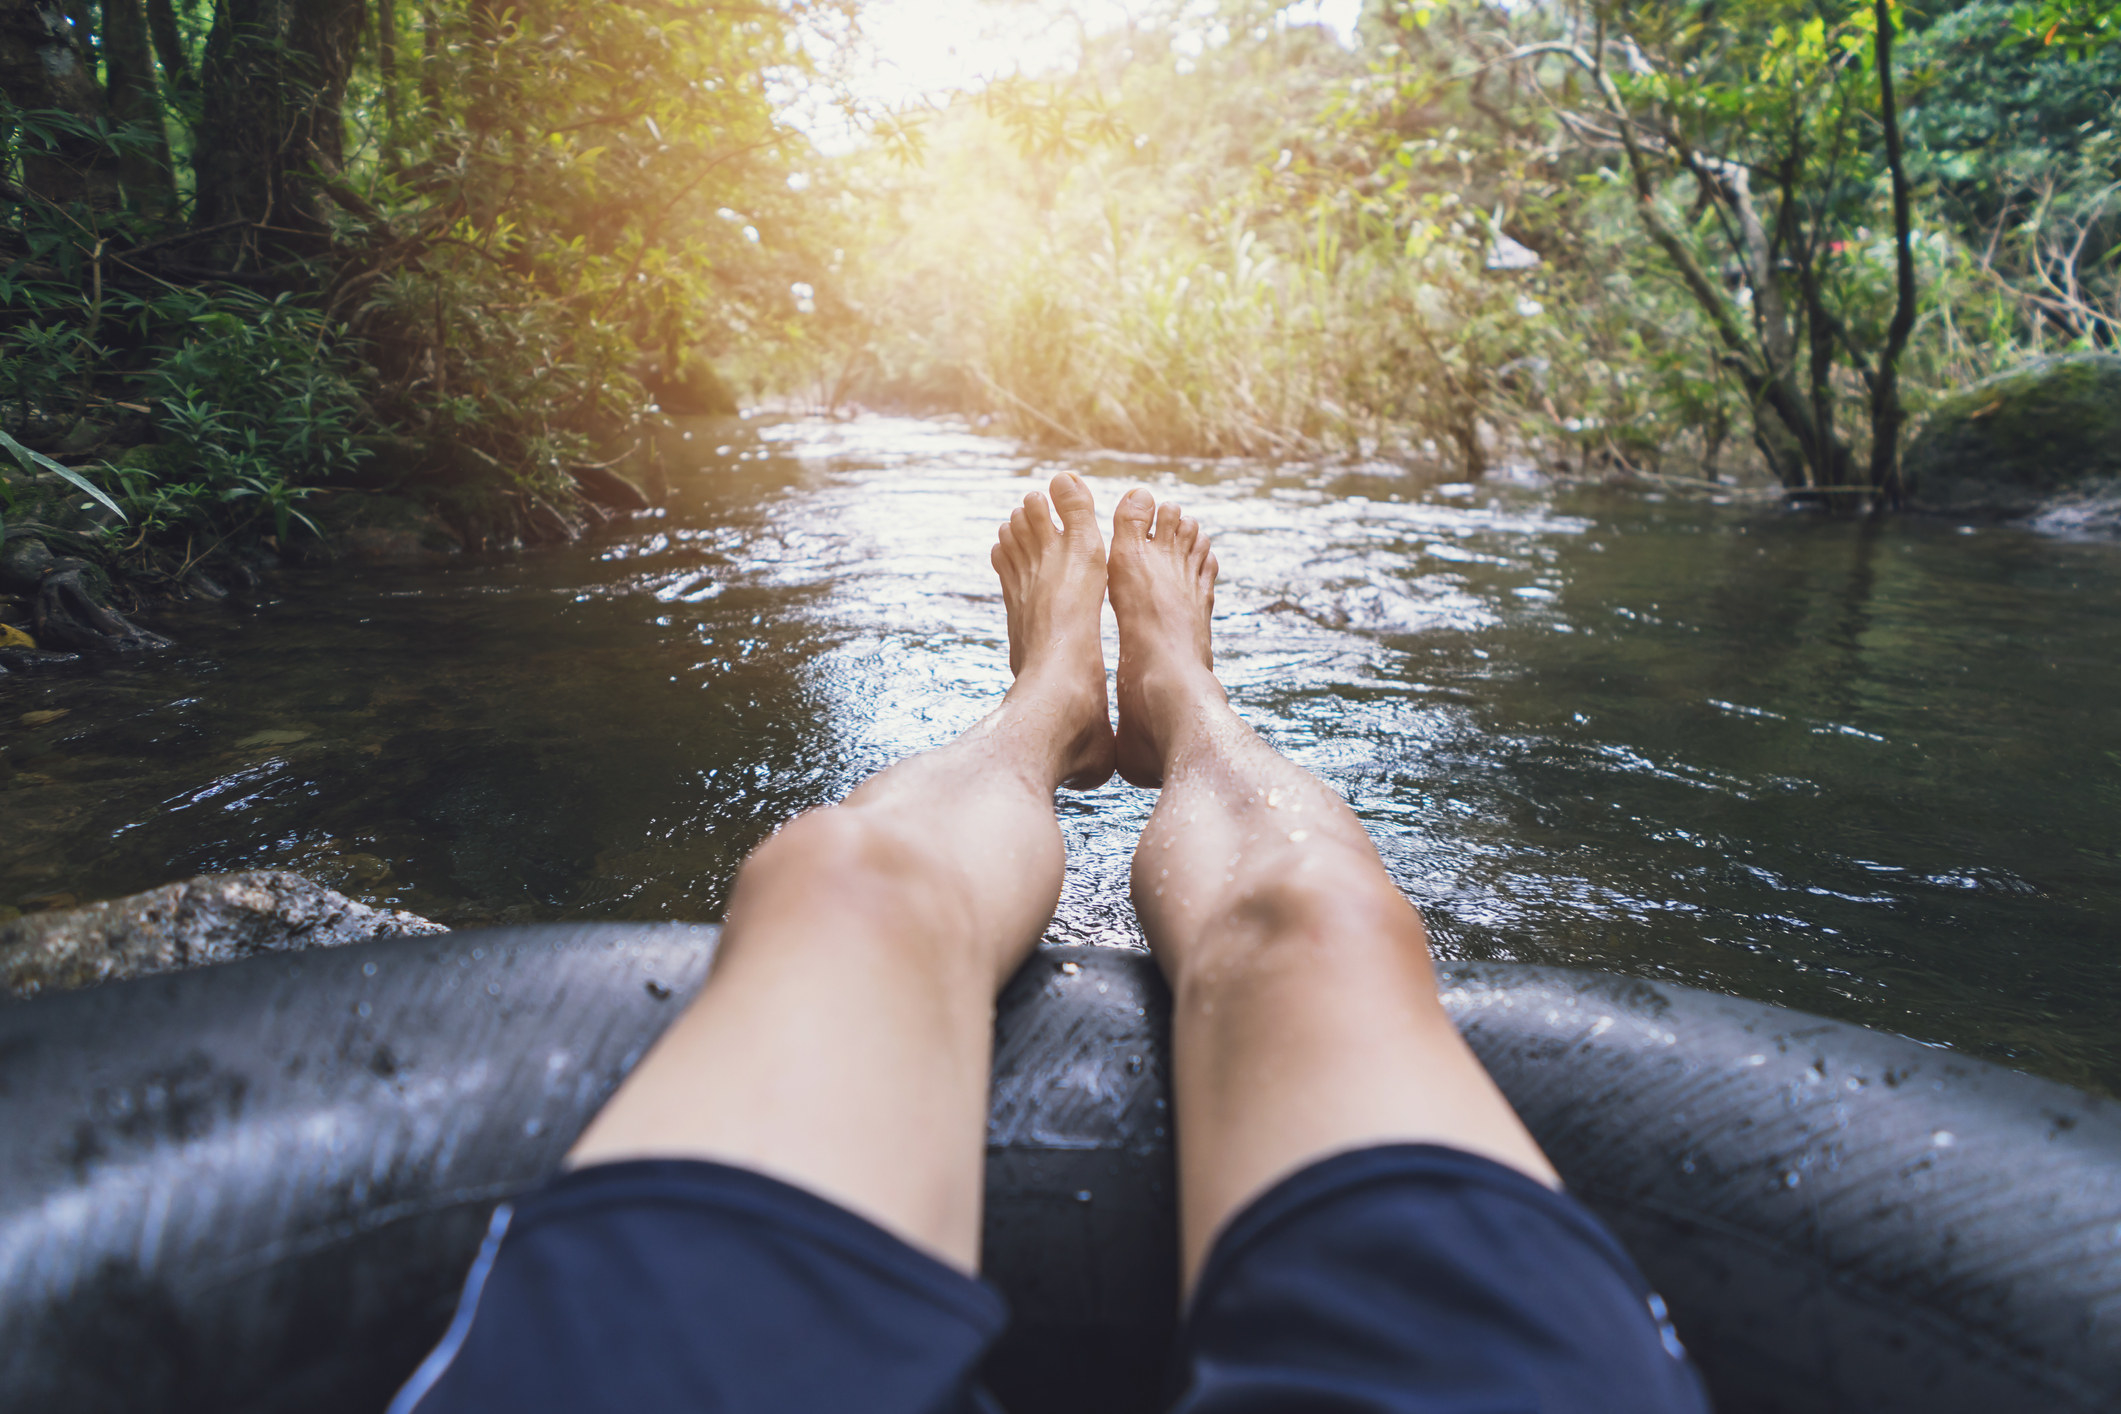 Person tubing down a river from a first-person POV. You see his feet and the river ahead.